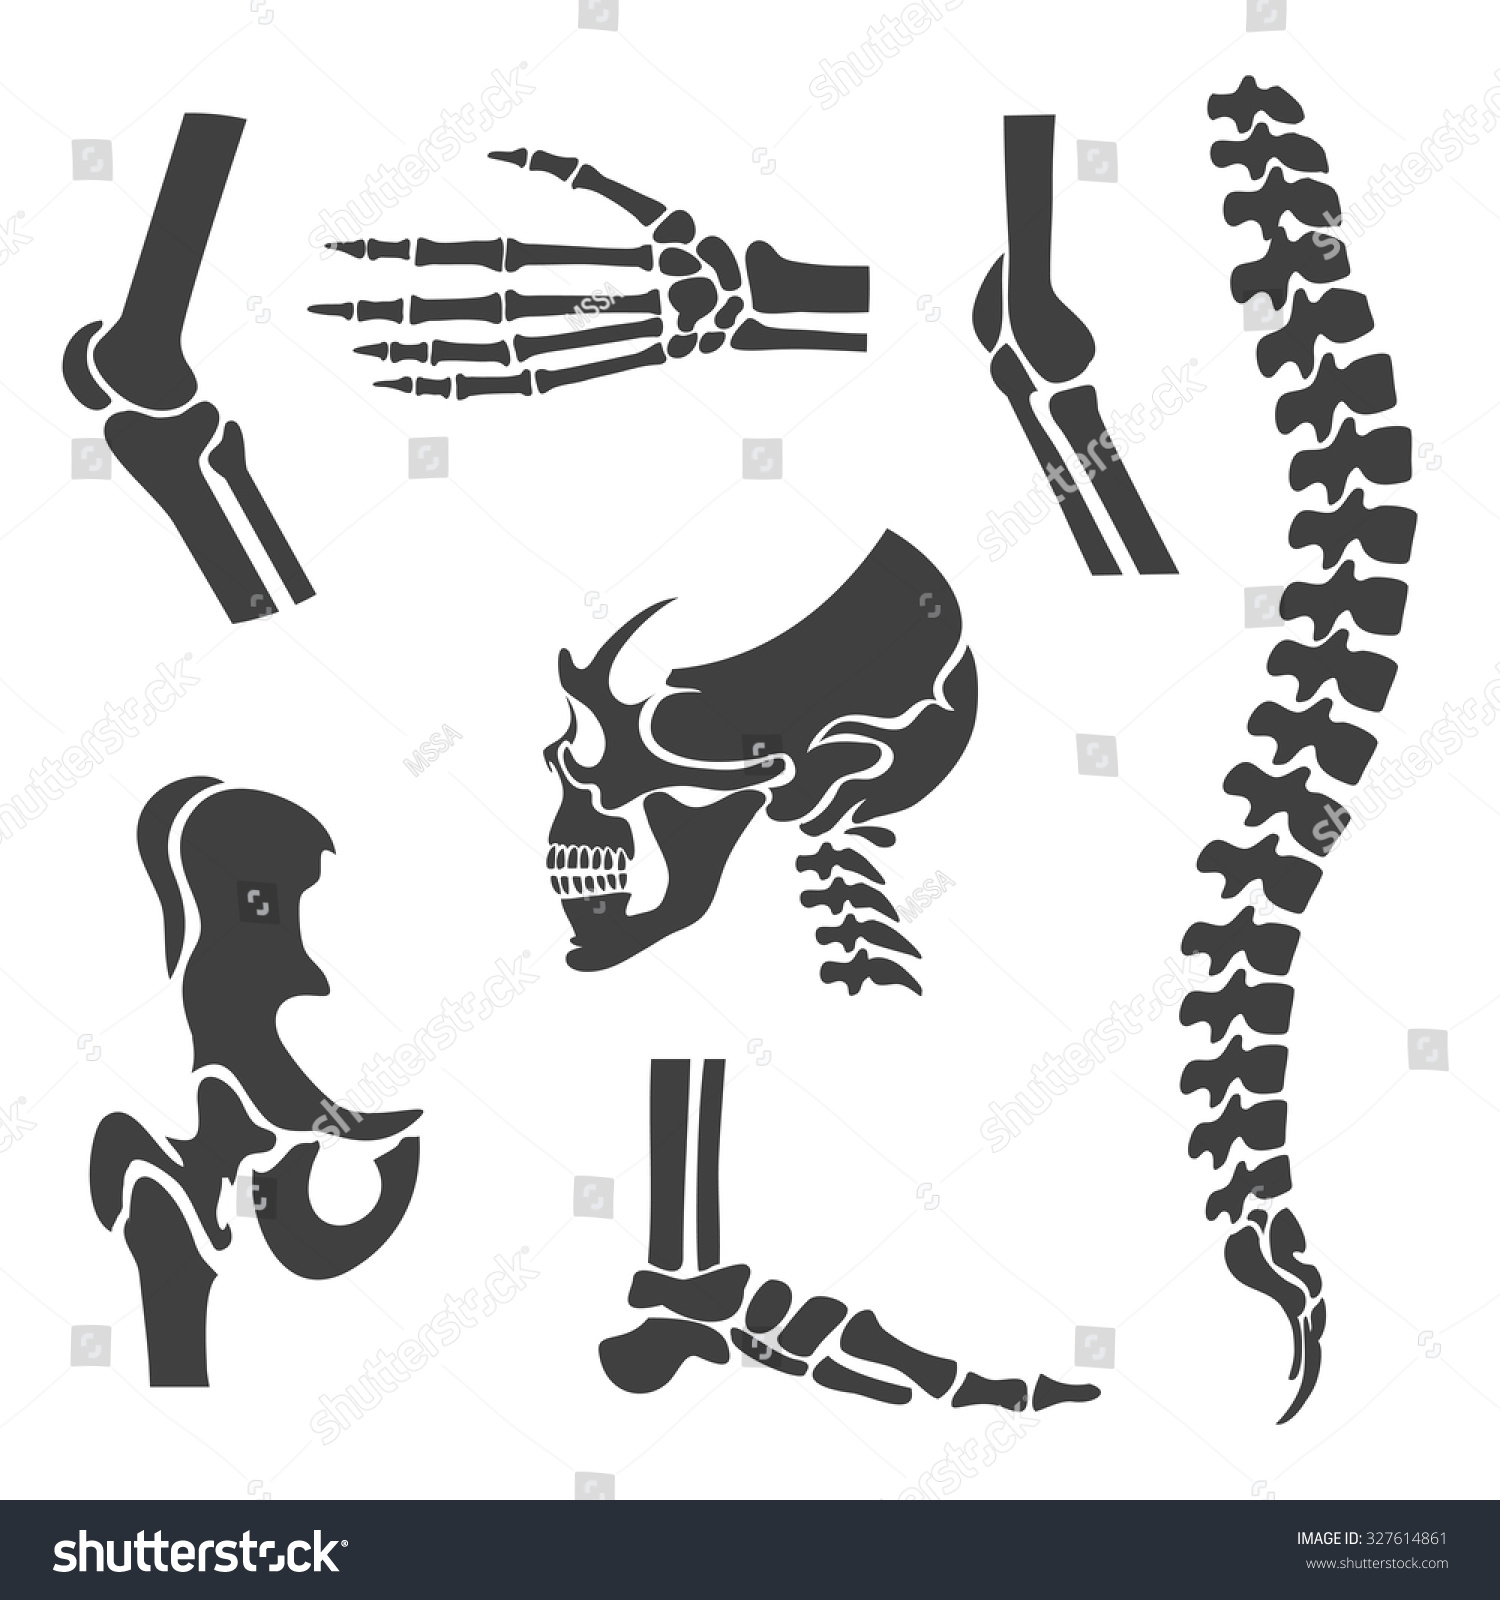 Human Joints Vector Set. Orthopedic And Spine Symbols. Elbow And Knee ...